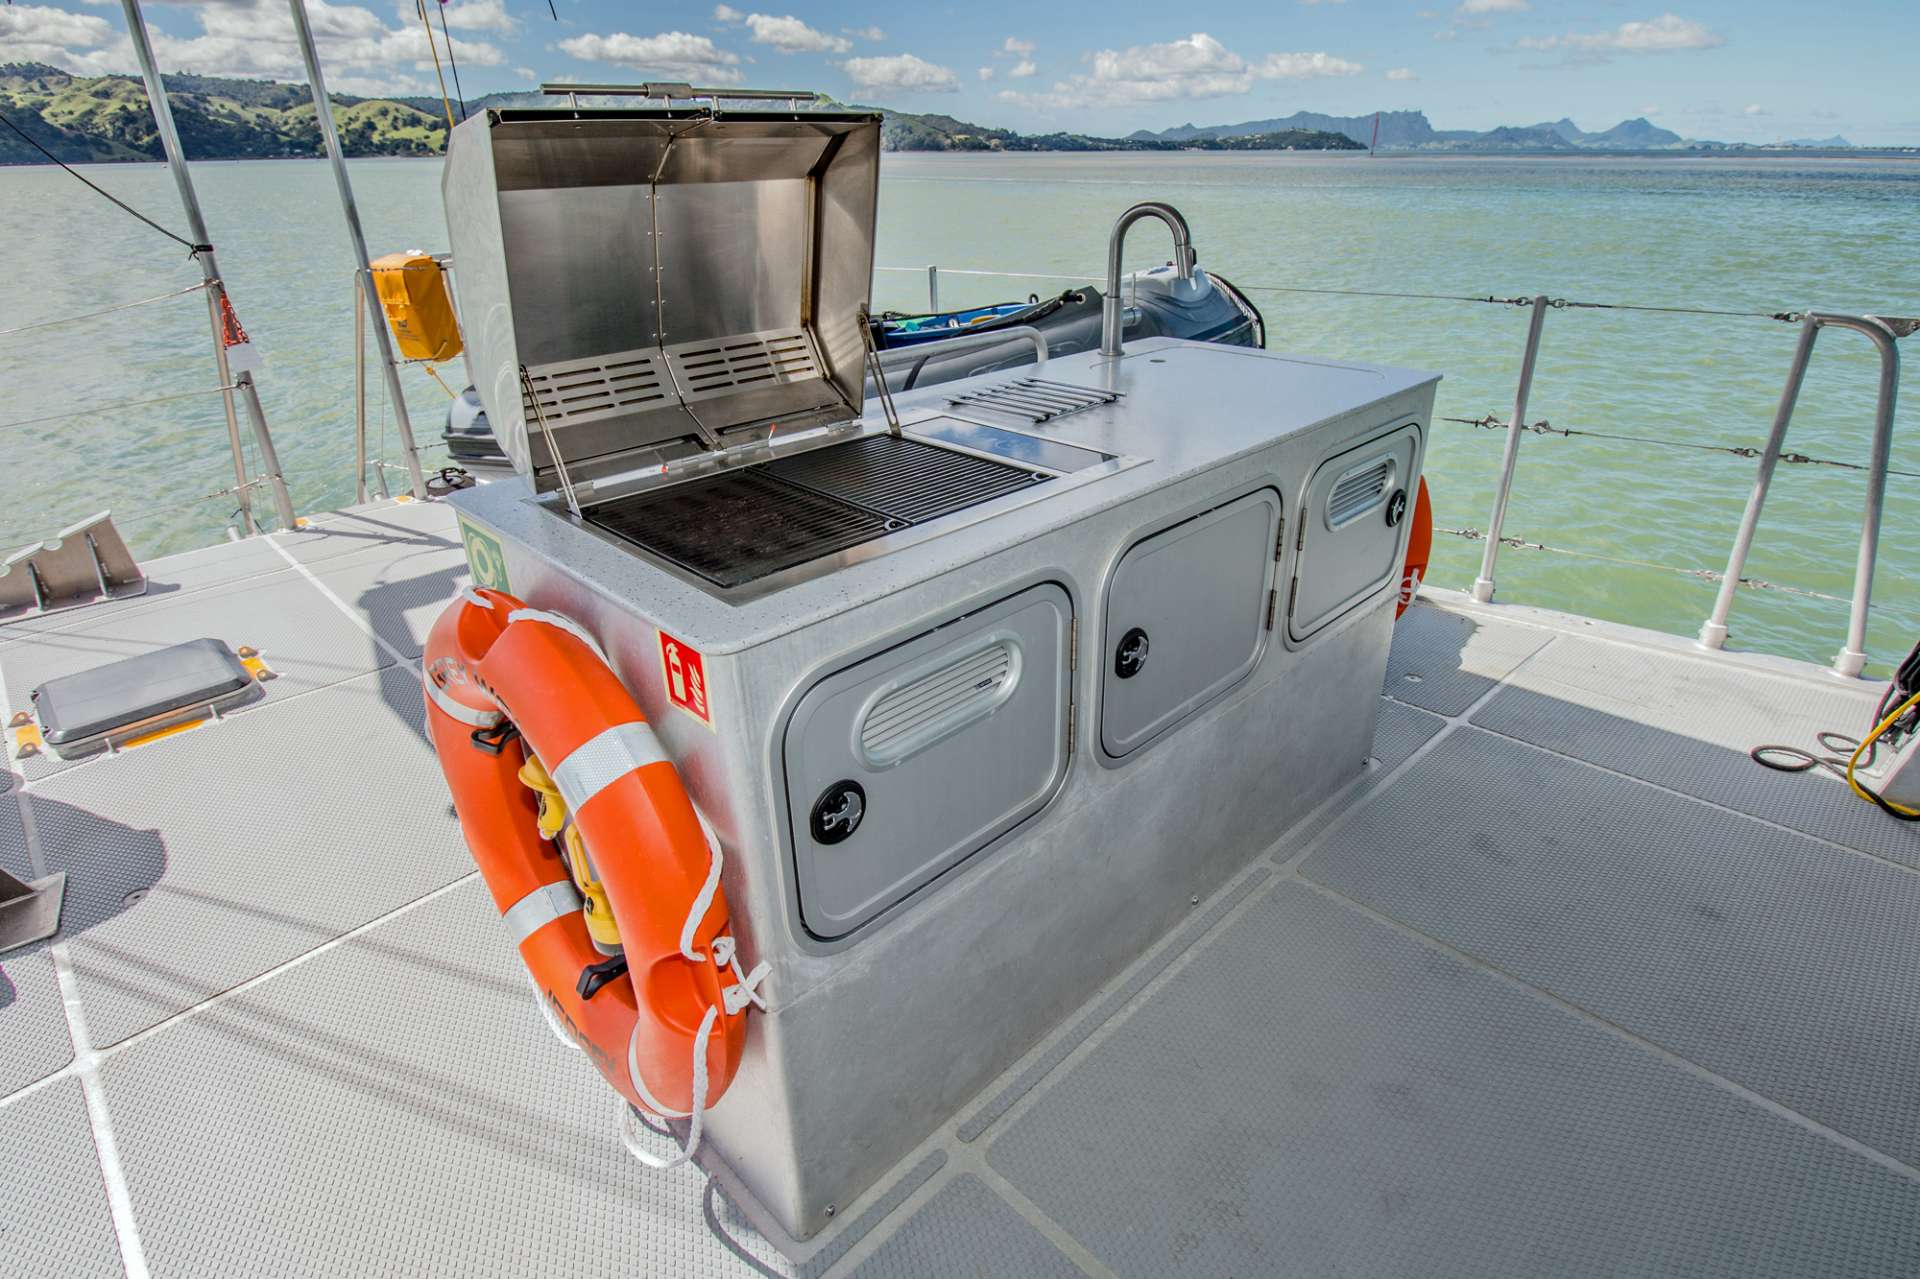 GREY WOLF Yacht Charter - Outdoor BBQ area